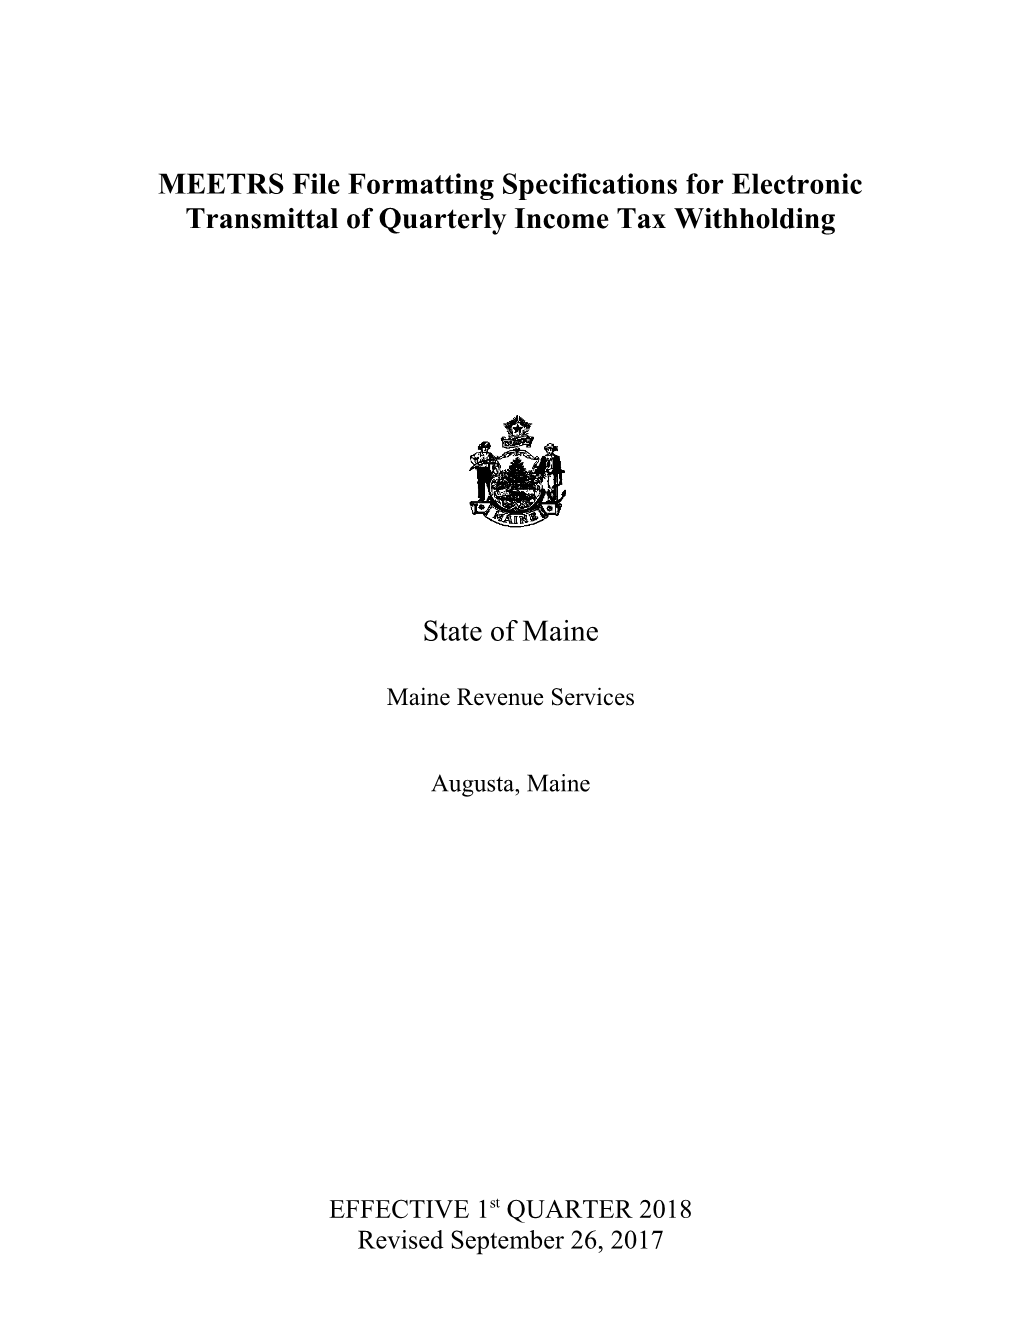 Maine ICESA File Formatting Specifications for Electronic Transmittal of Income Tax Withholding s2